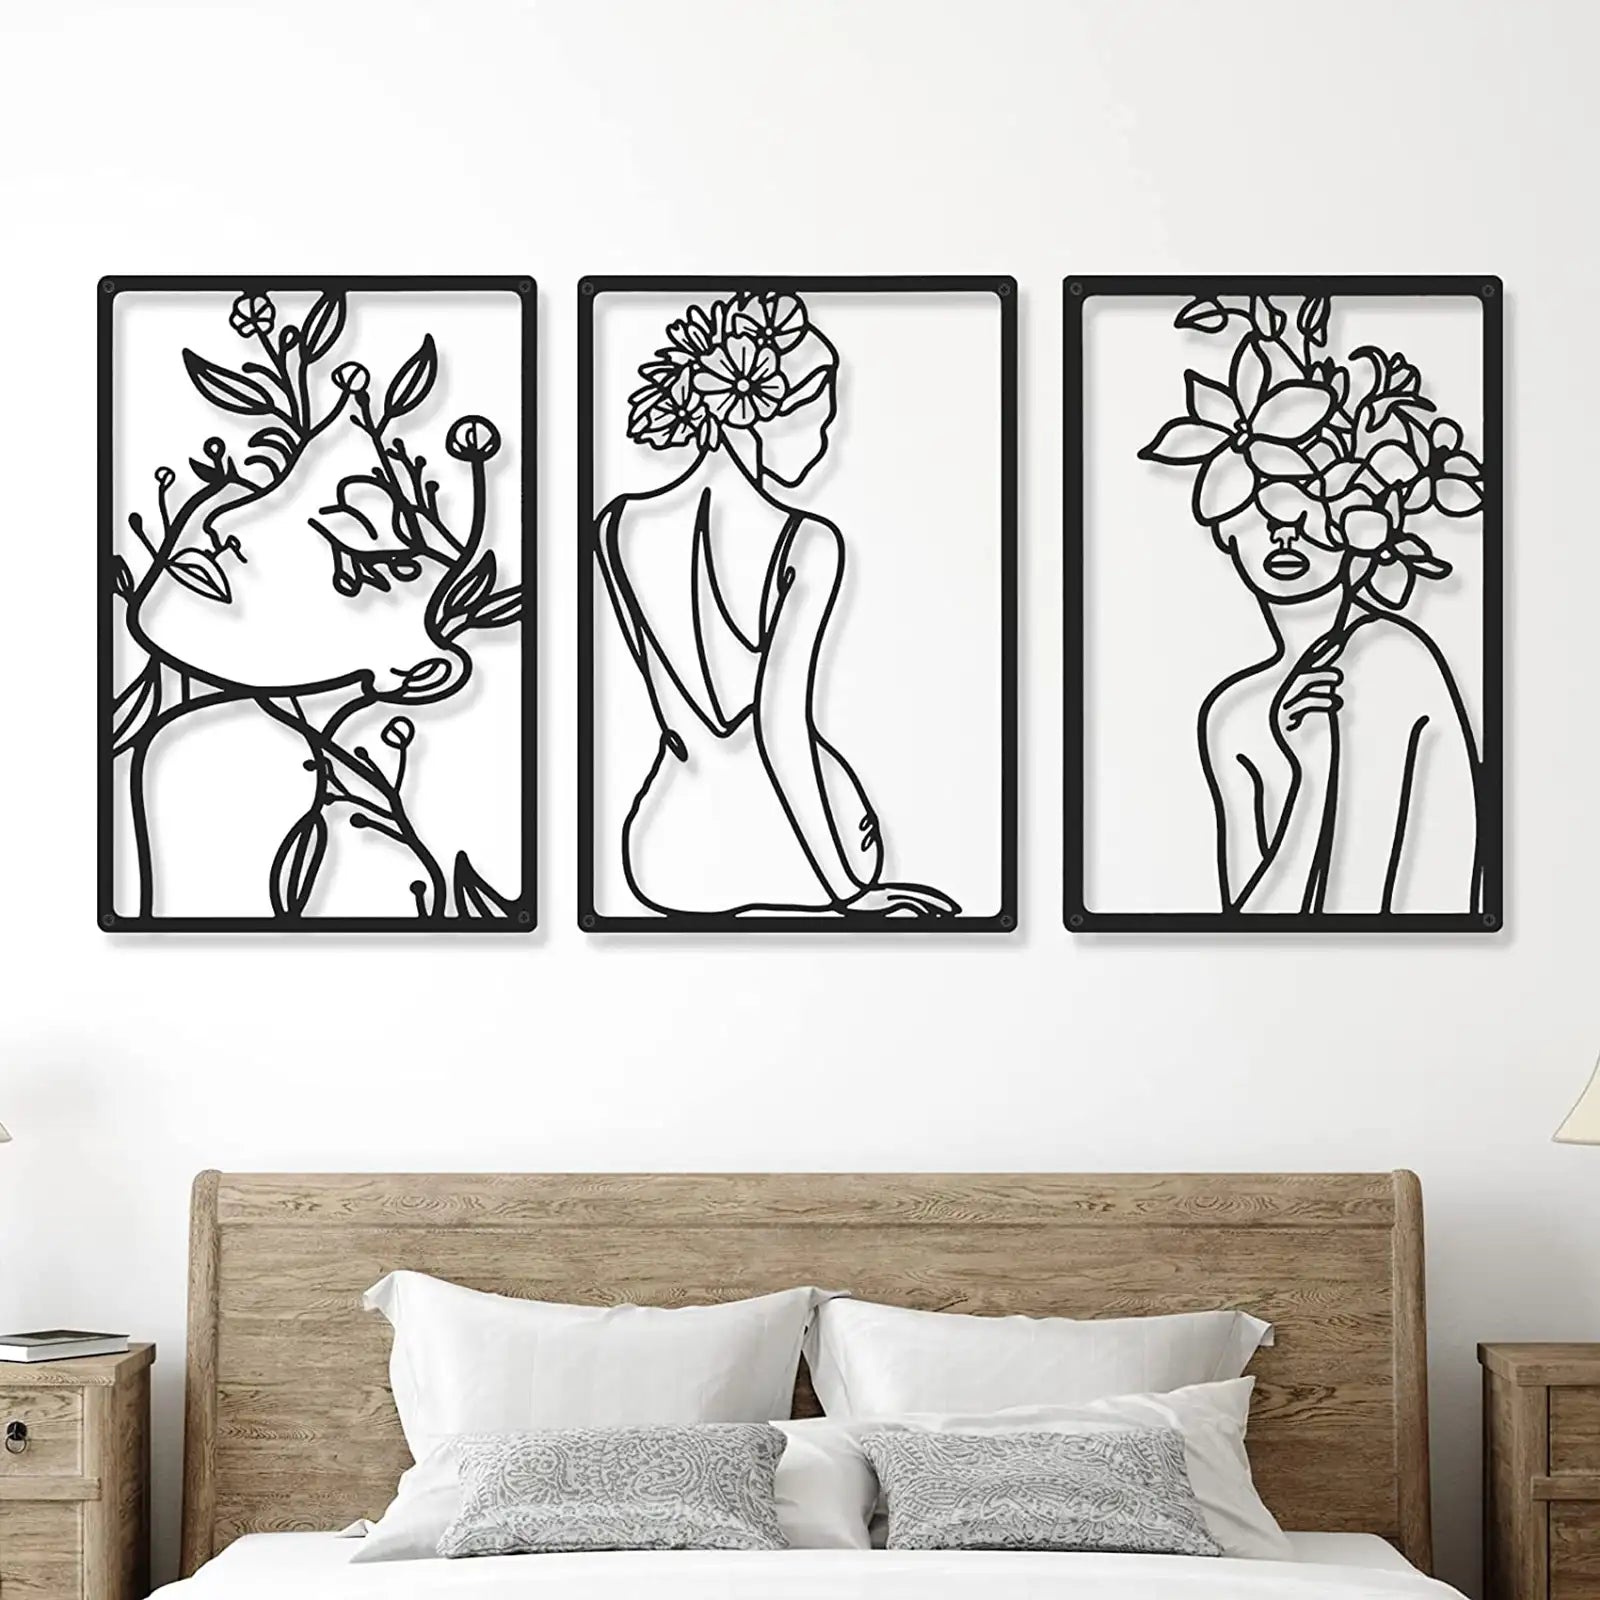 6 Pieces Black Metal Wall Decor Modern Minimalist Abstract Woman Wall Art Aesthetic Female Wall Sculpture Line Drawing Hanging Art Minimalist Decor for Kitchen Bedroom Bathroom Living Room Wall Decor